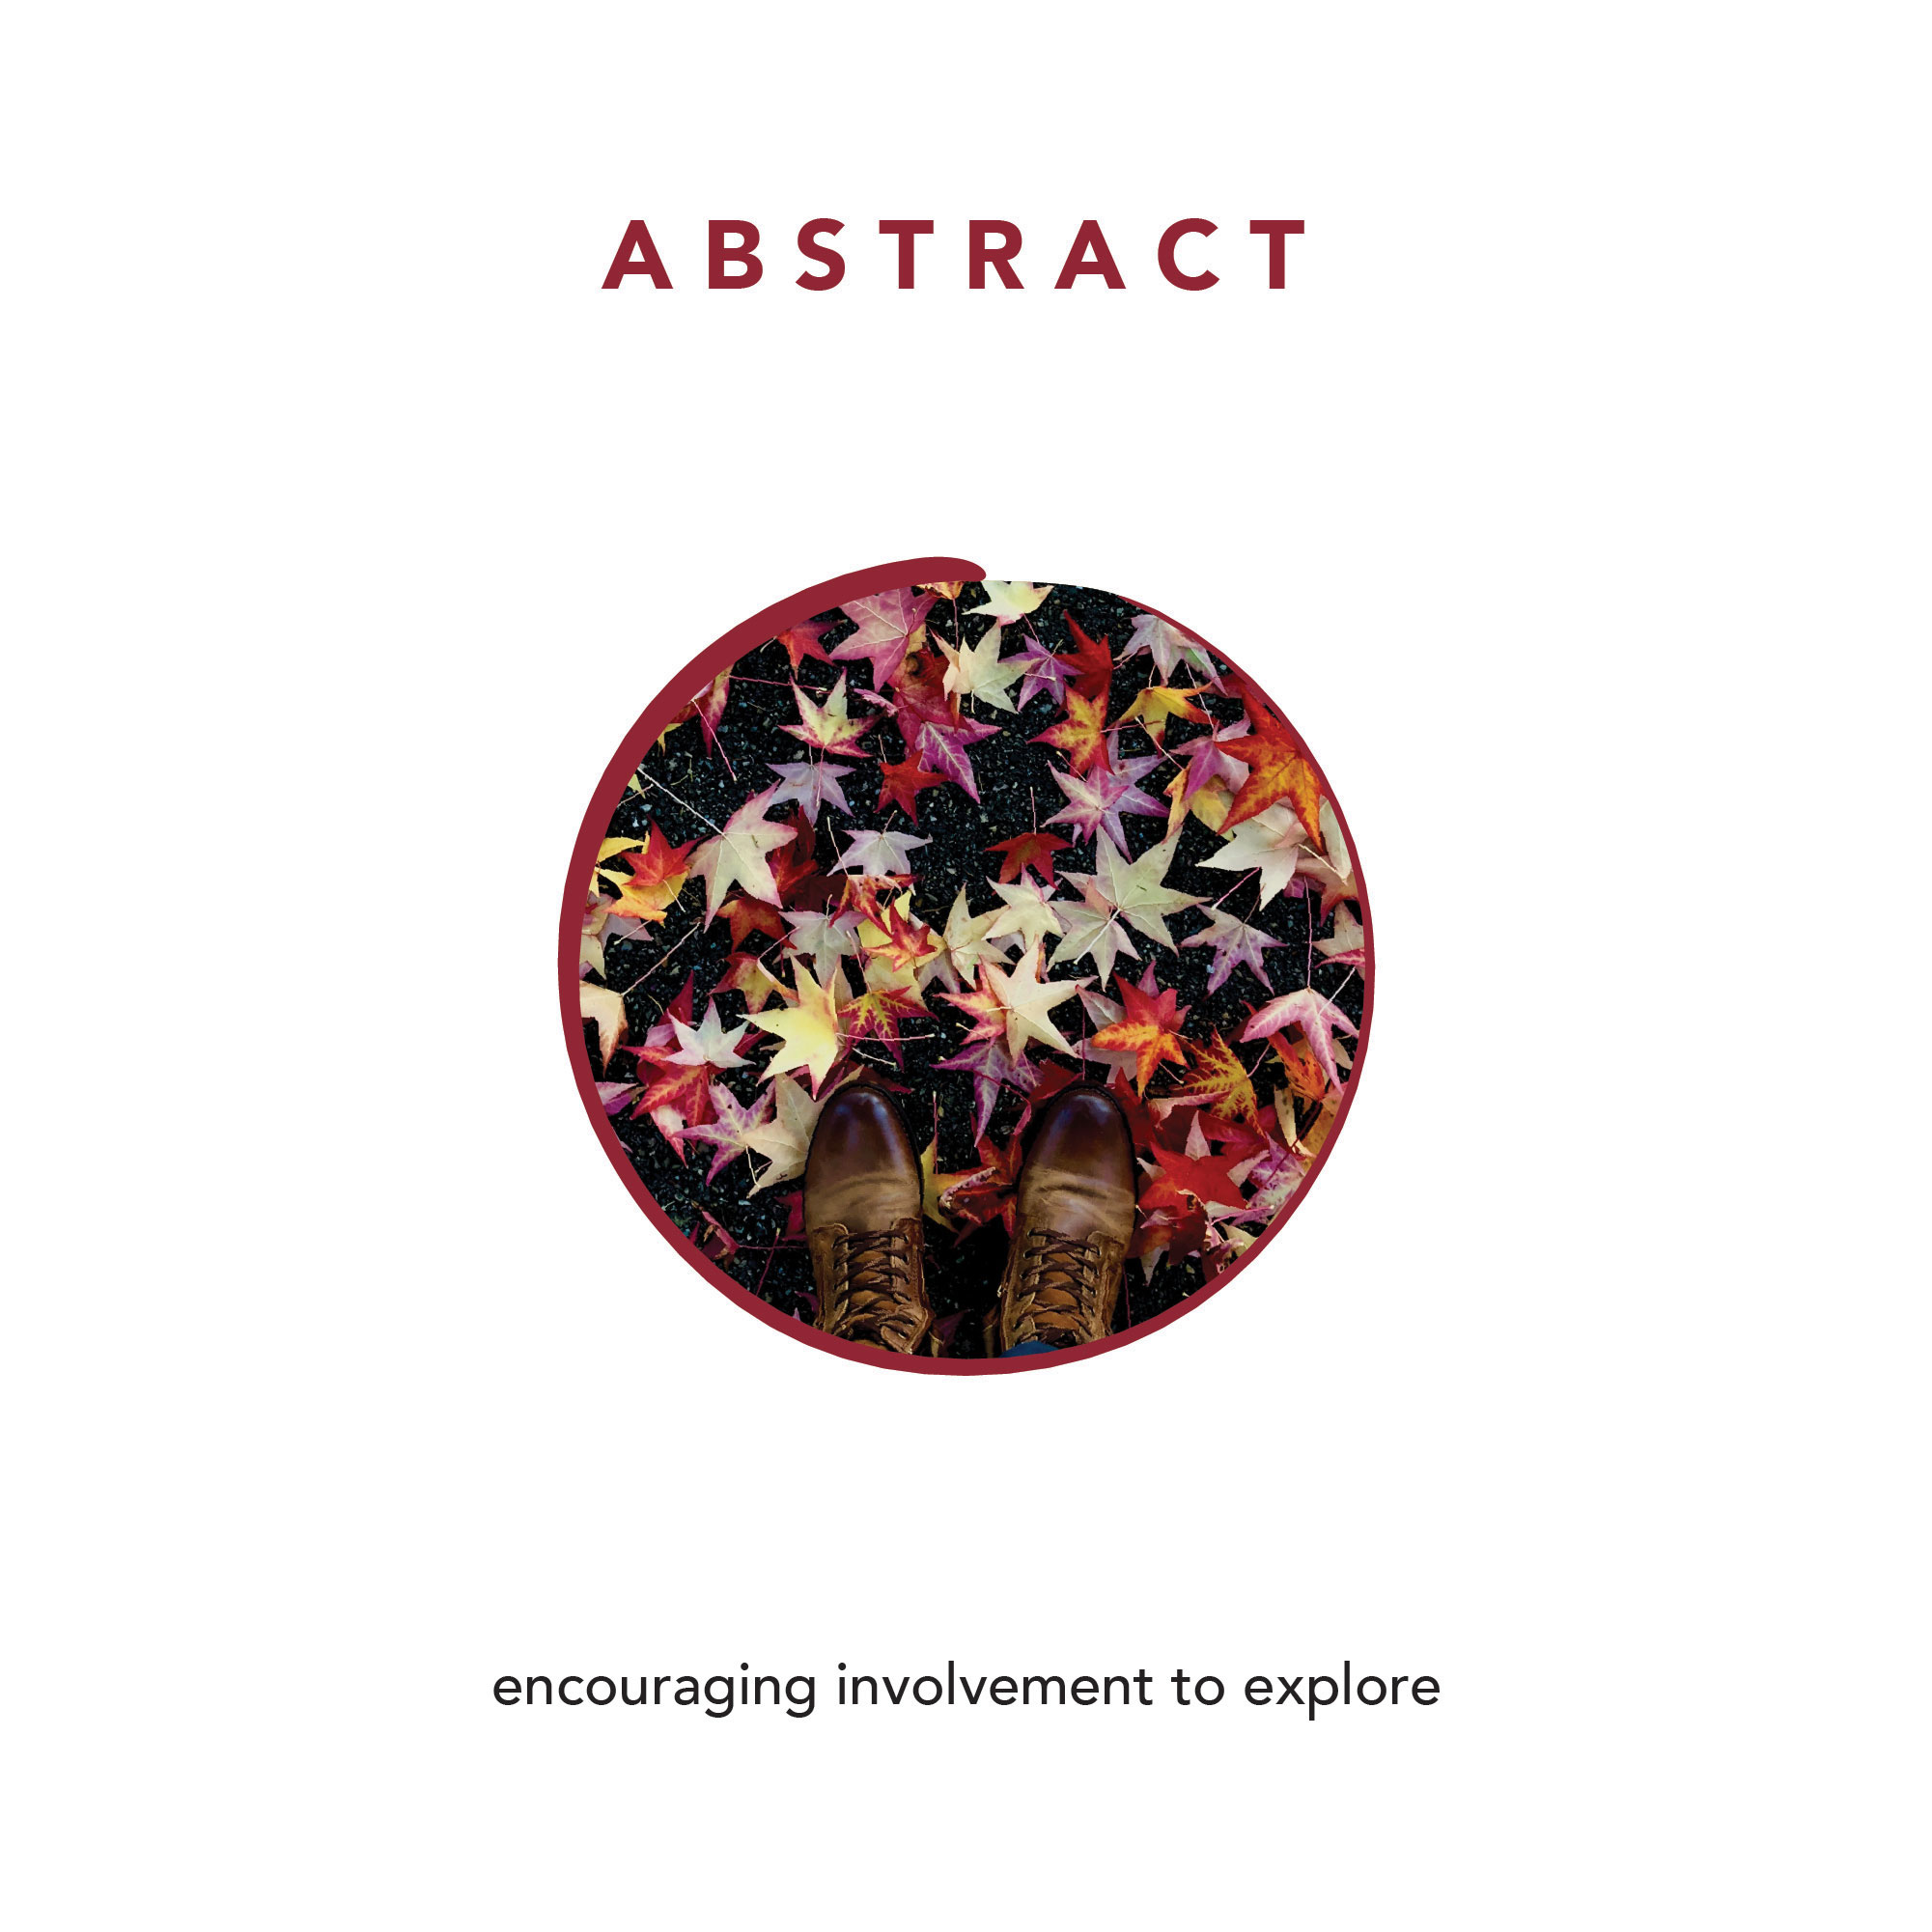 ABSTRACT - encouraging involvement to explore